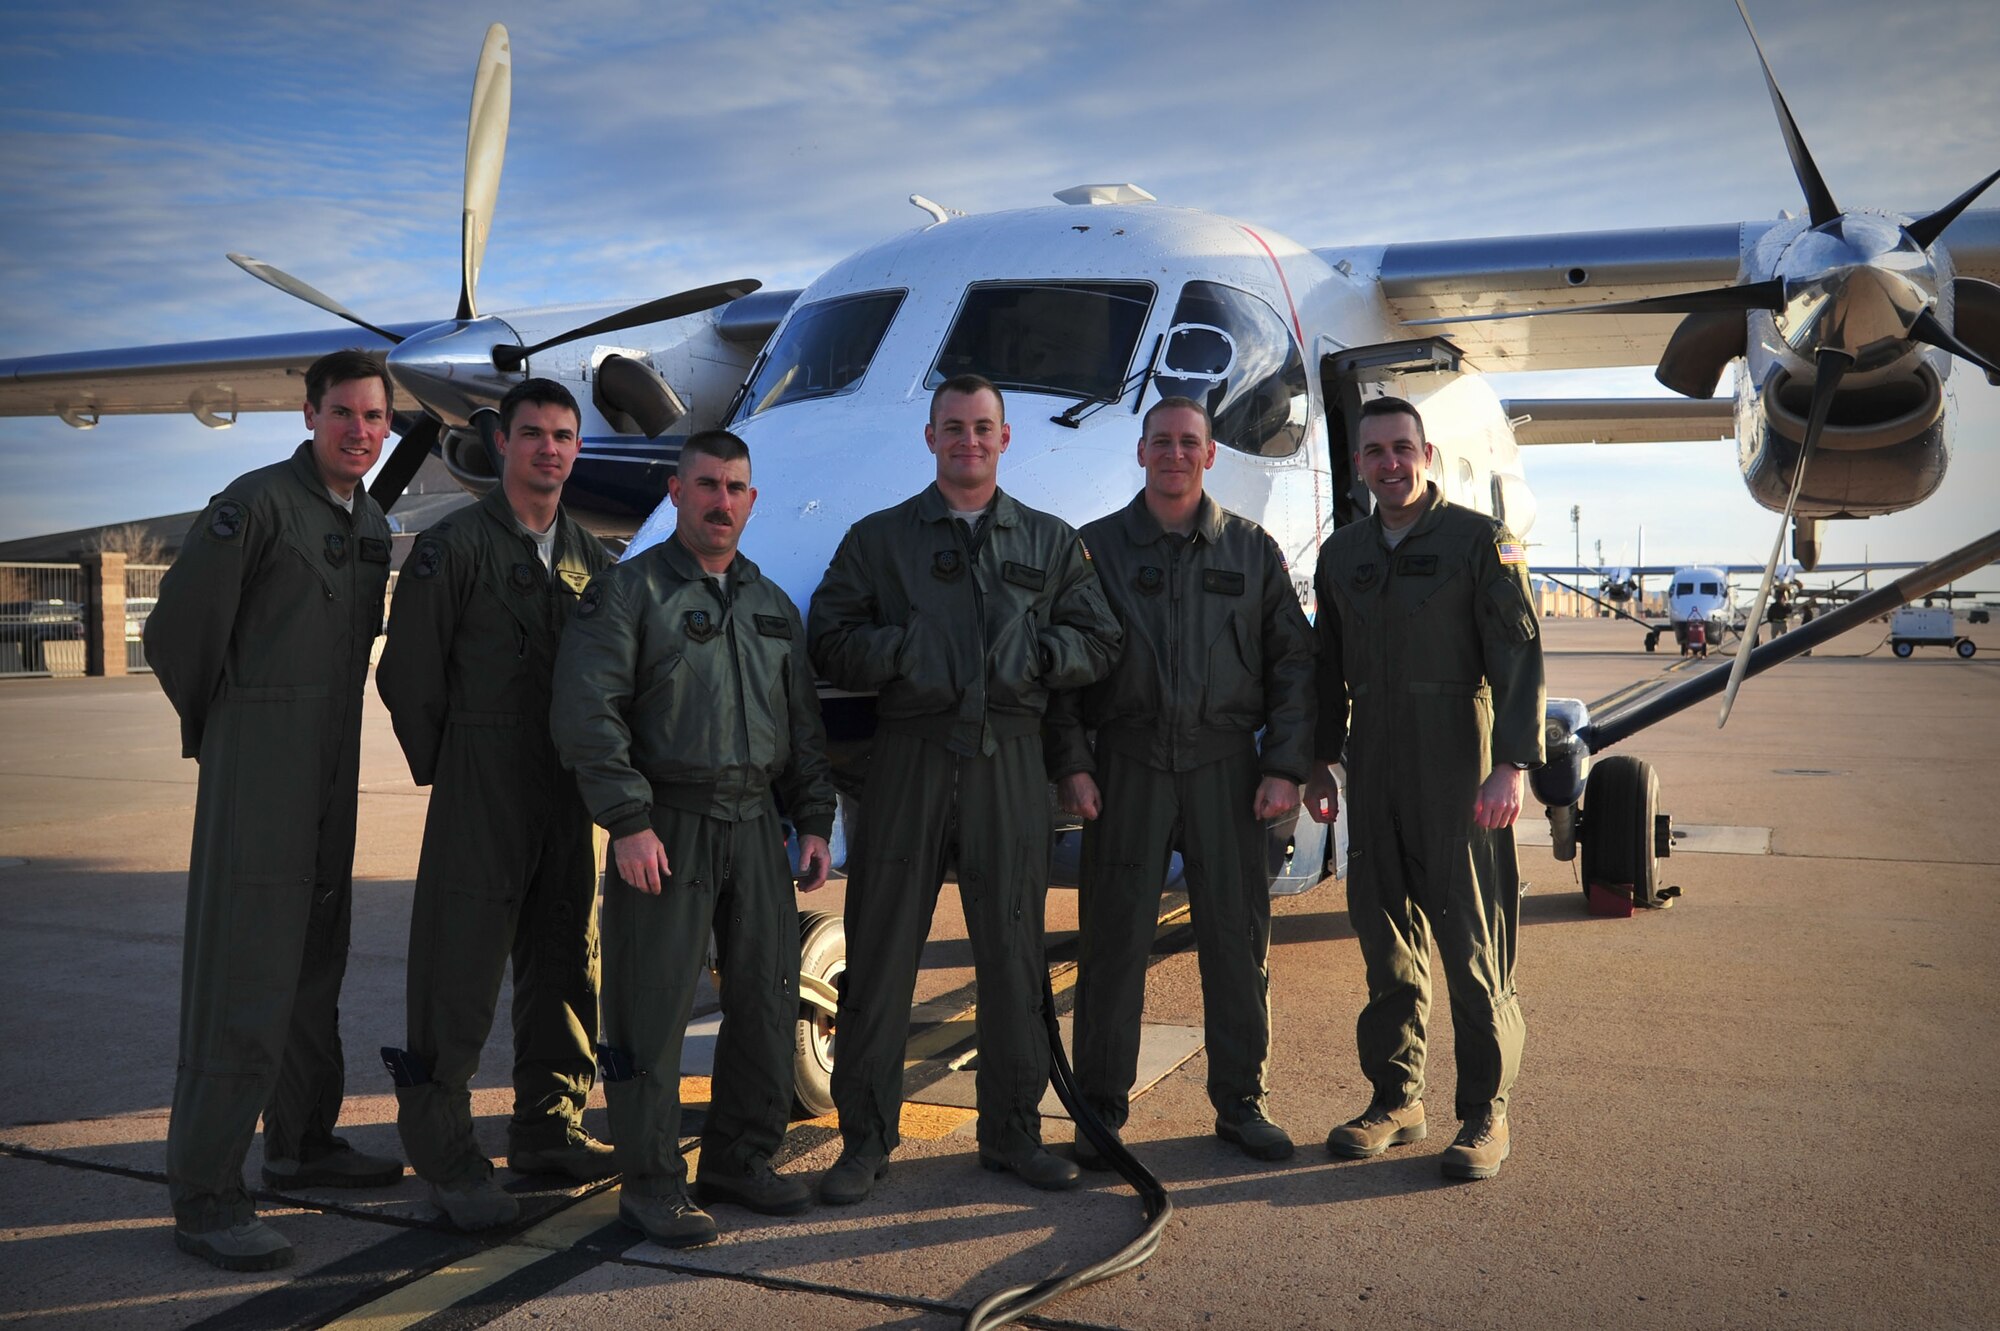 U.S. Air Force aircrew members with the 318th Special Operations Squadron prepare to board the last C-145As for the final local flight off the flightline at Cannon Air Force Base, N.M., March 28, 2013. The squadron’s C-145A aircraft will continue their mission under the vision and leadership of the 6th Special Operations Squadron at Duke Field, Fla. (U.S. Air Force photo/Senior Airman Alexxis Pons Abascal) 